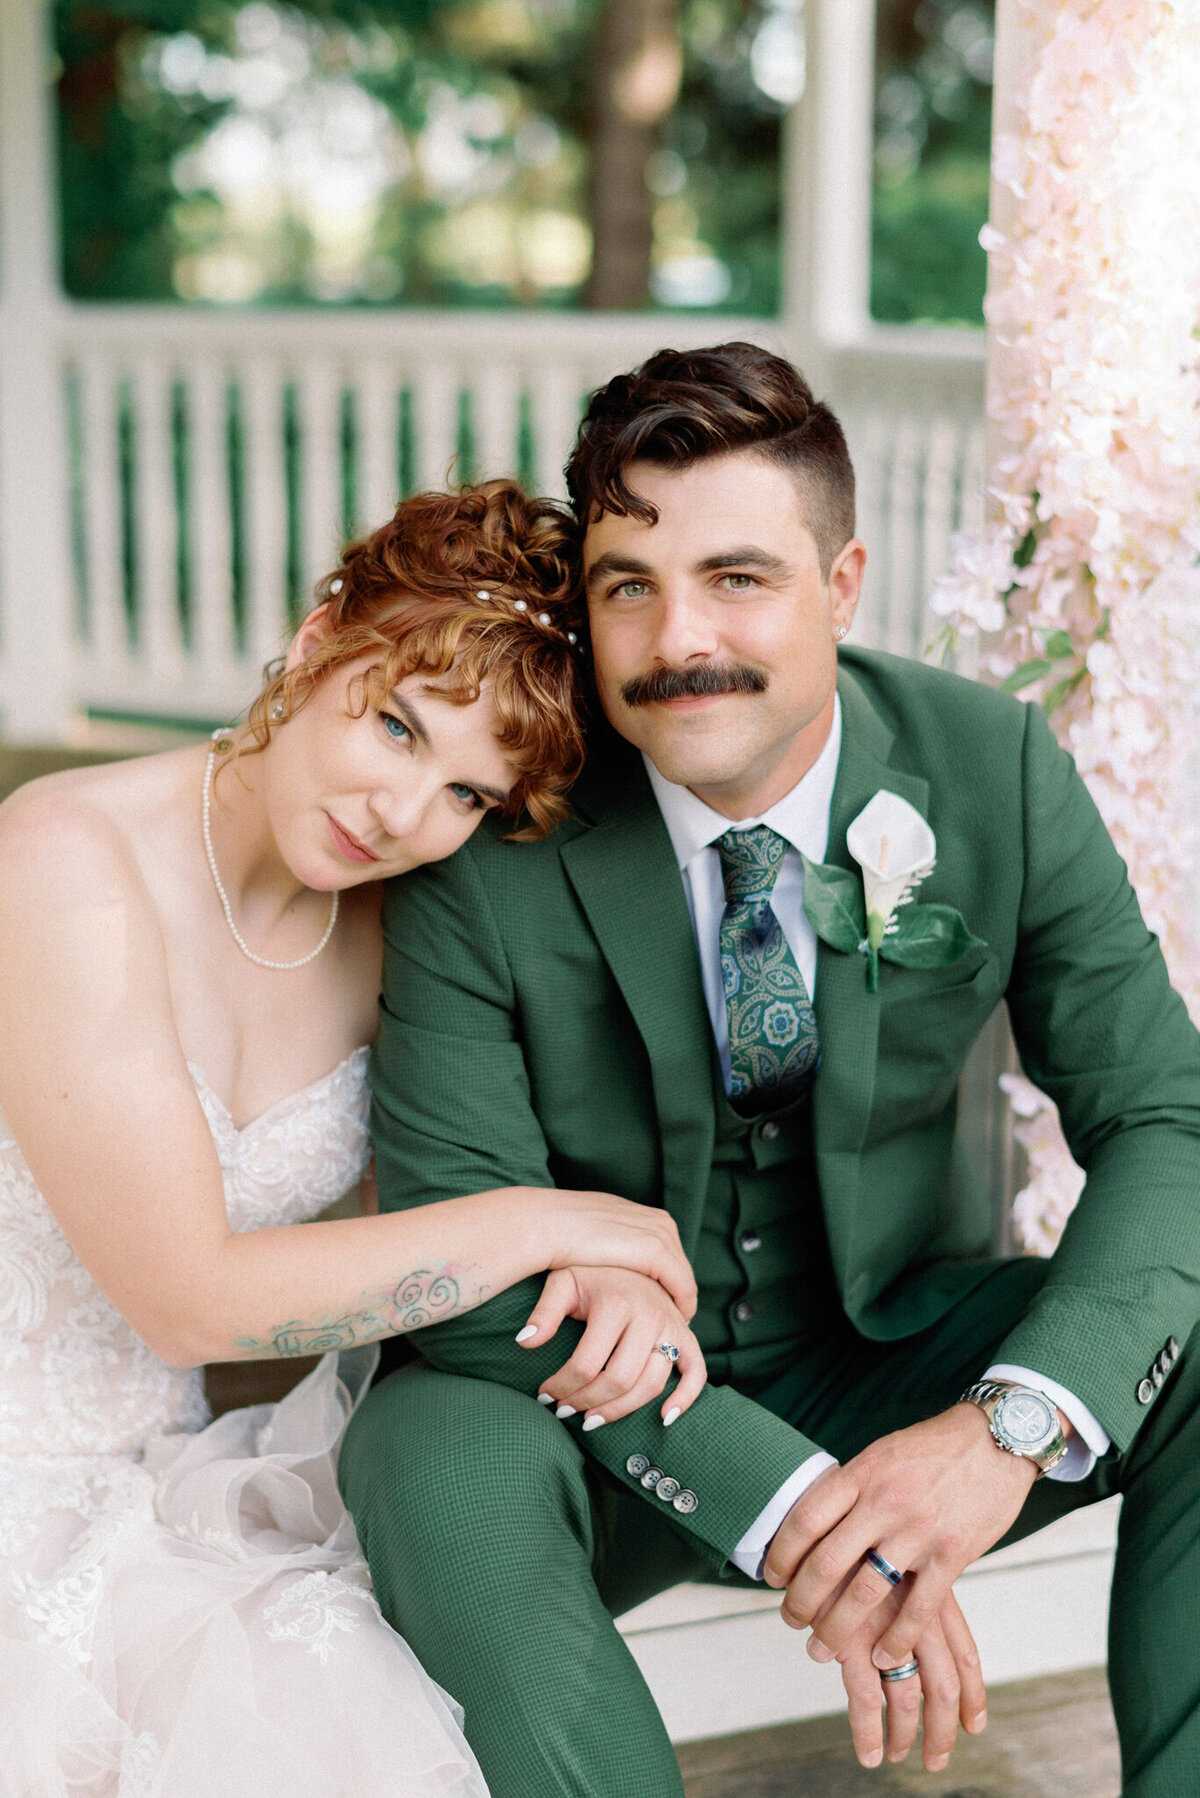 Stunning ginger haired bride embracing groom in green wedding suit, captured by Kaity Body Photography, elegant film inspired wedding photographer in Calgary, Alberta. Featured on the Bronte Bride Vendor Guide.